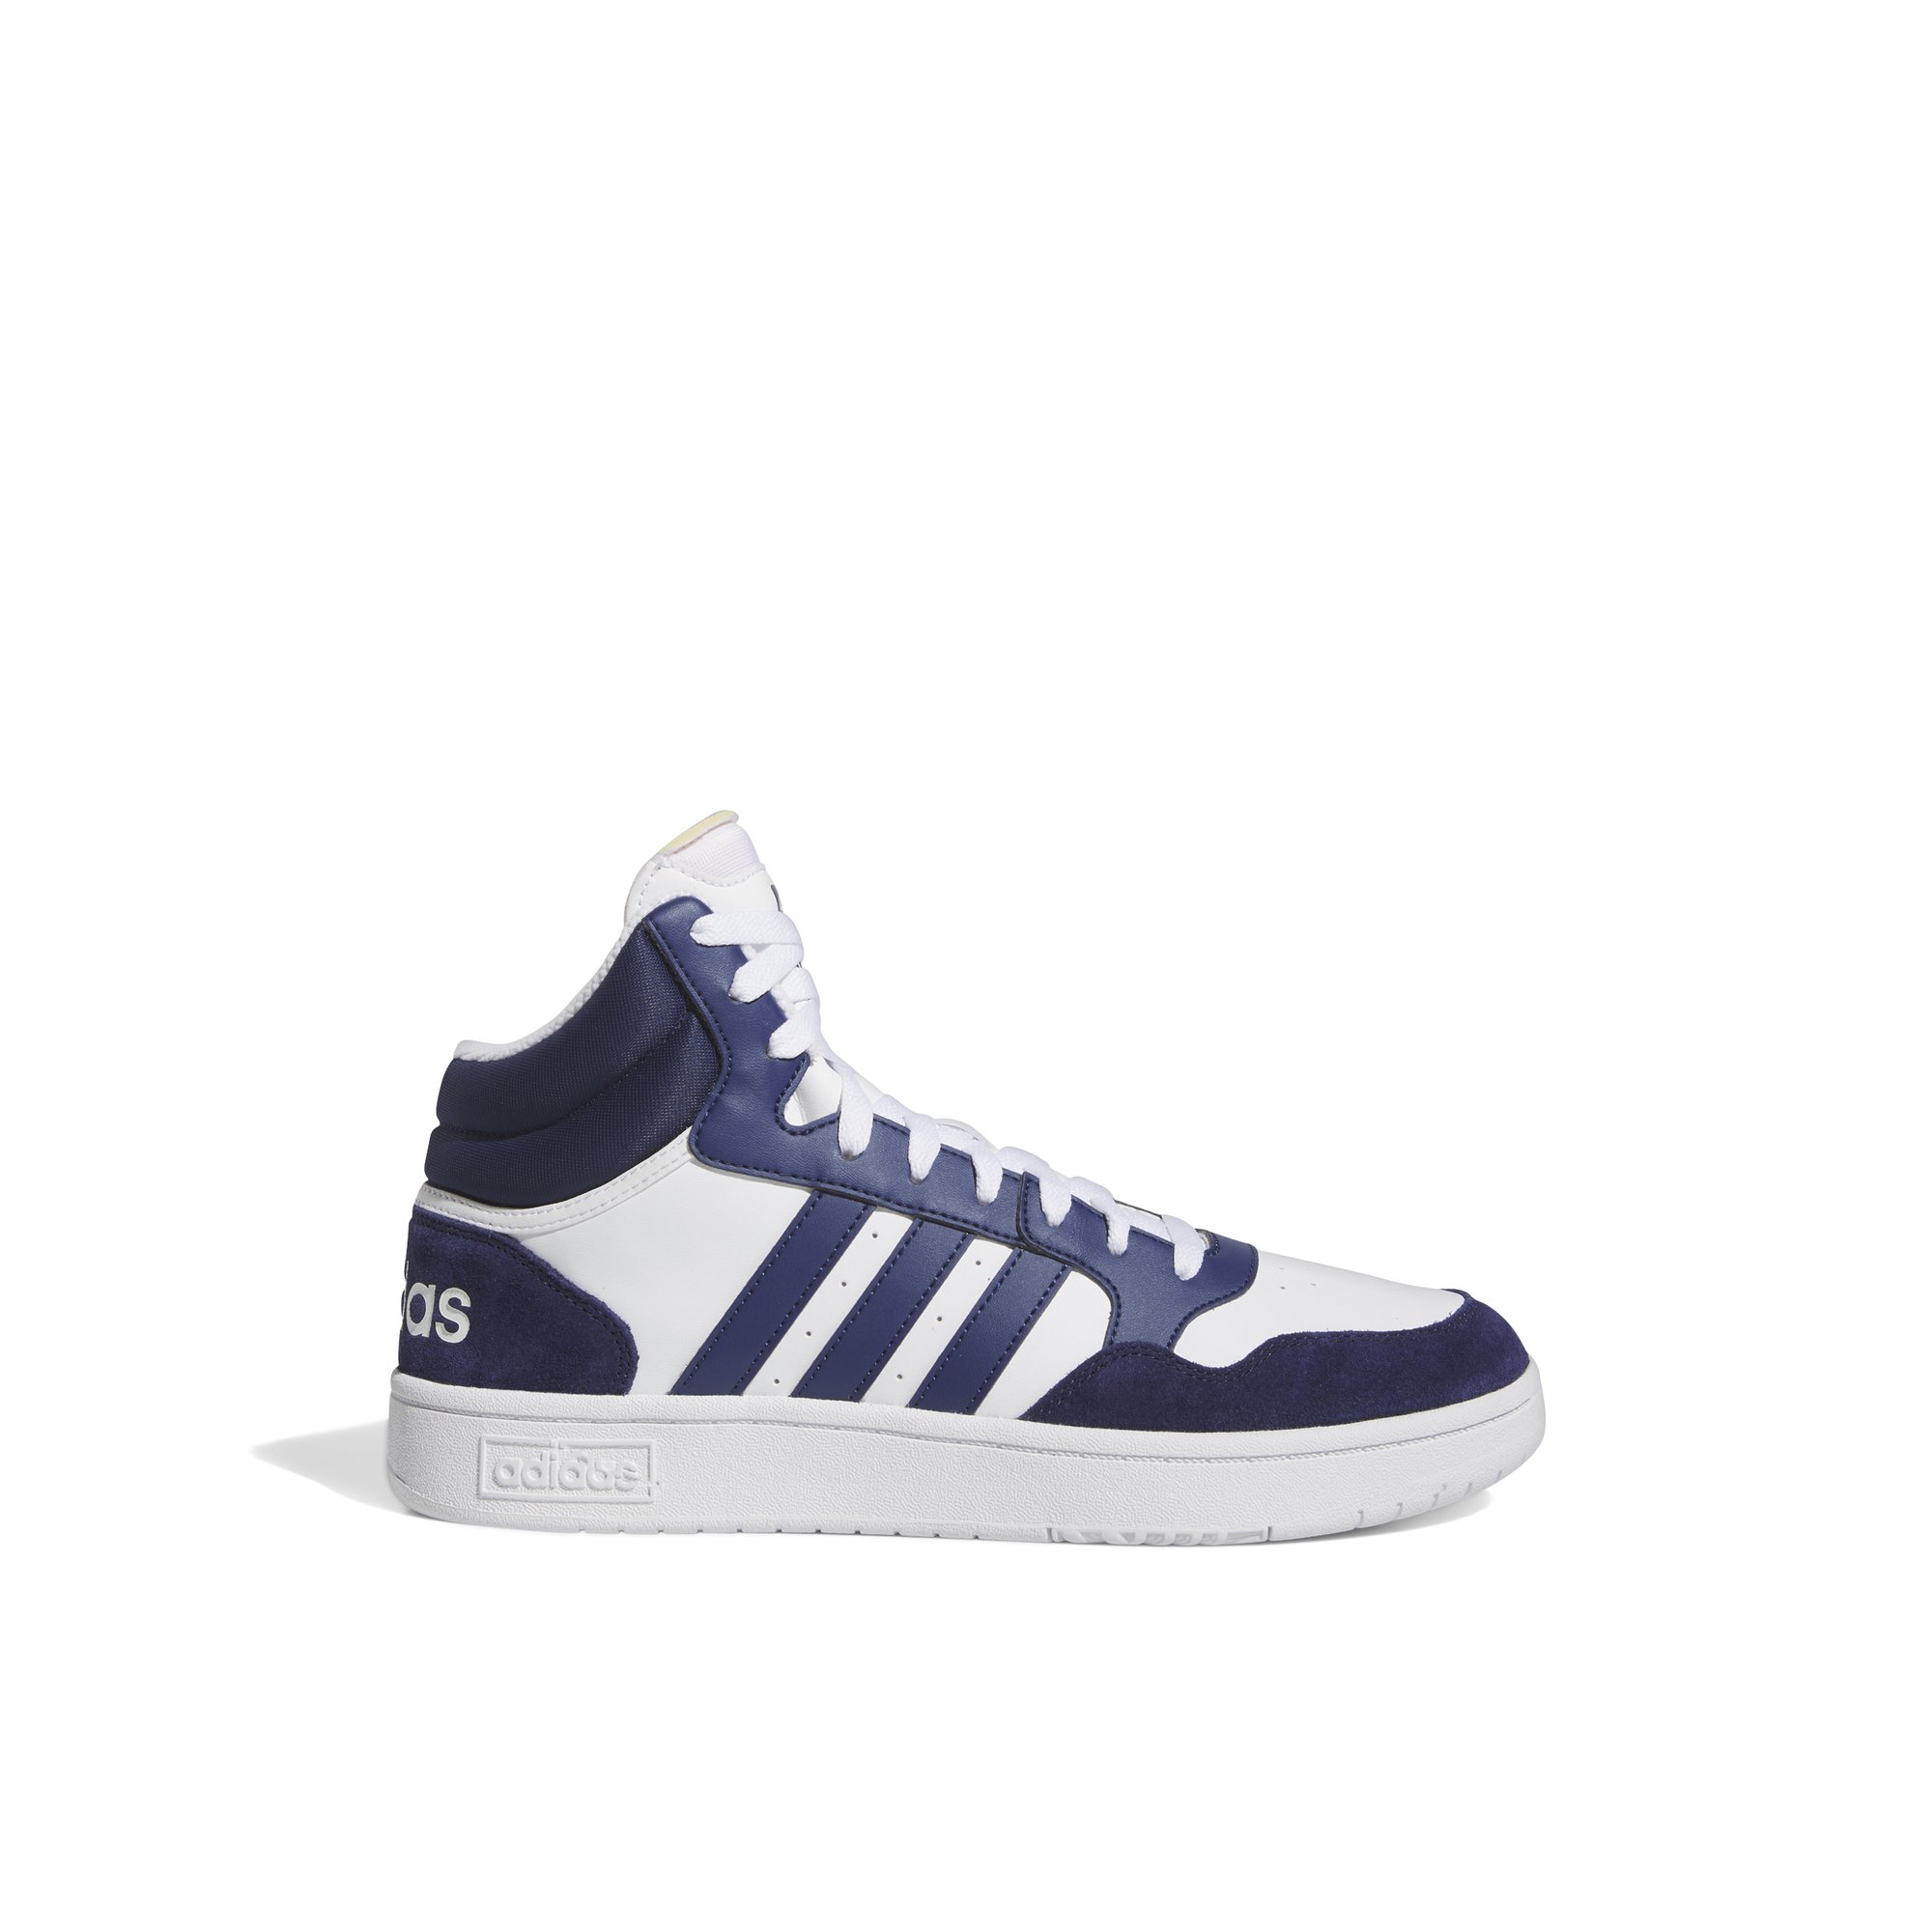 Adidas Hoopsmid-tb. - T Collection Boys Shoes